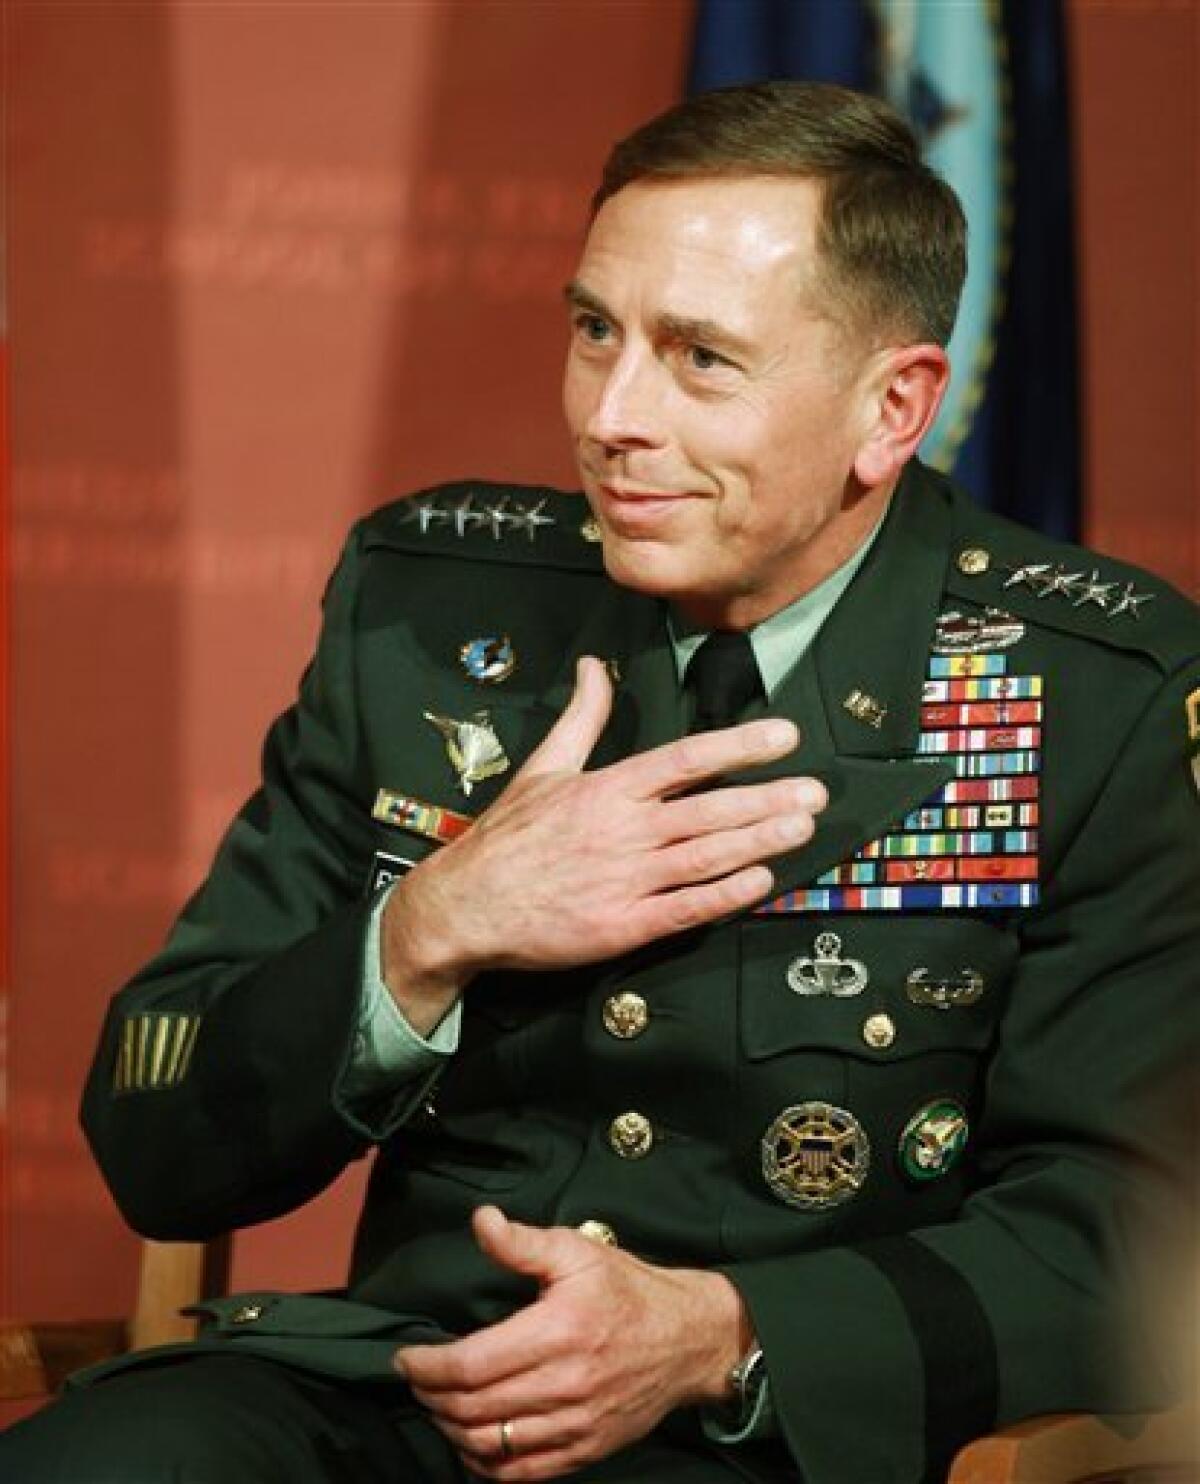 FILE - This is a Tuesday, April 21, 2009 file photo of U.S. Army Gen. David Petraeus, head of U.S. Central Command, touching his hand to his chest after it was suggested that Reserve Officers Training Corps, or ROTC, should return to Harvard University during a forum at the John F. Kennedy School of Government on the schools campus, in Cambridge, Mass. Petraeus, the top U.S. commander for the wars in Iraq and Afghanistan, was diagnosed with prostate cancer in February and has since undergone two months of radiation treatment, the Pentagon said Tuesday. (AP Photo/Steven Senne)